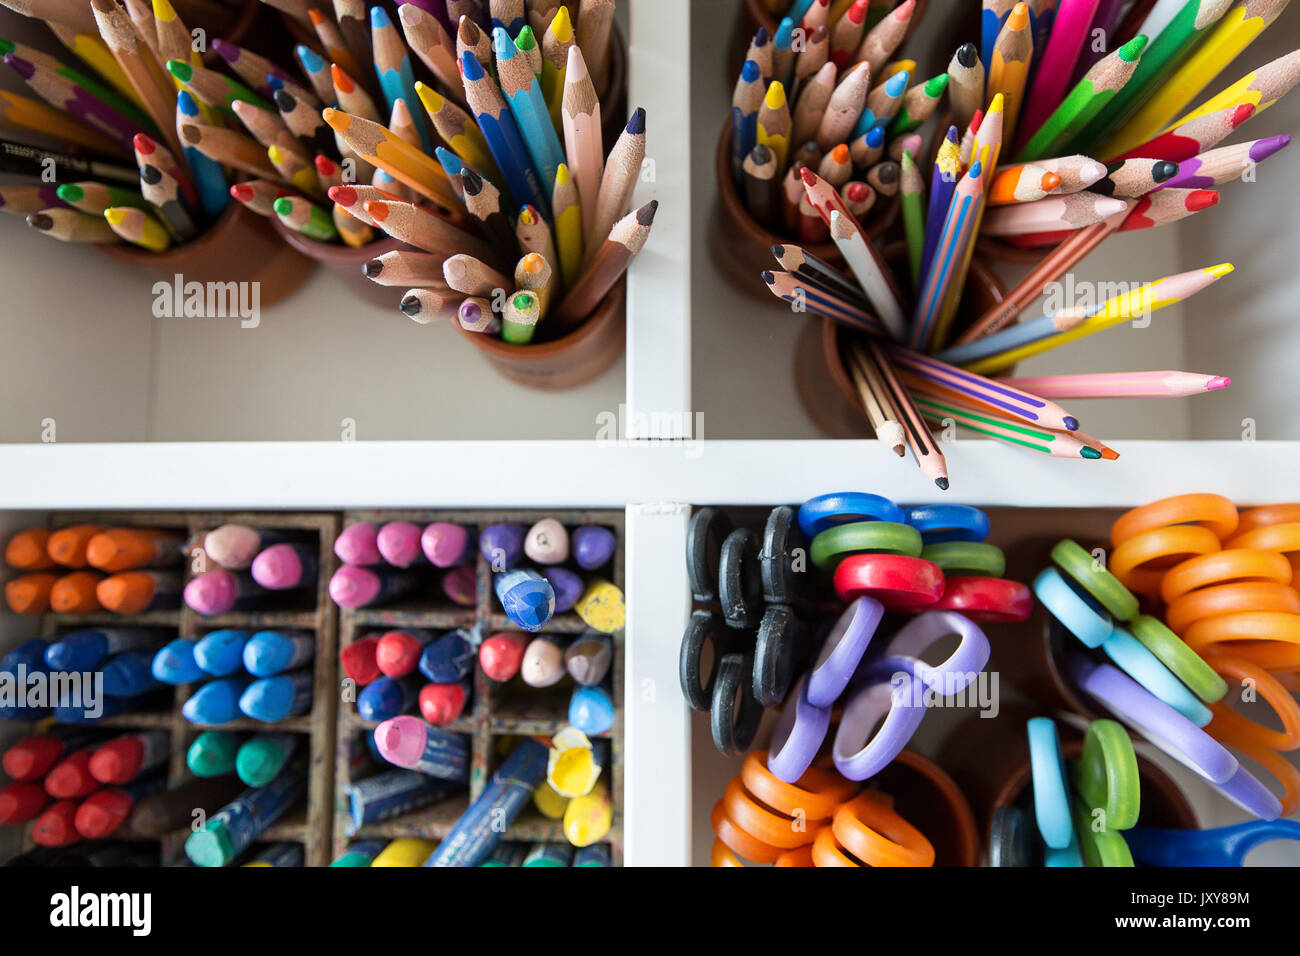 Primary, elementary or nursery school. Coloured pencils, pastel and scissors in a white piece of furniture Stock Photo